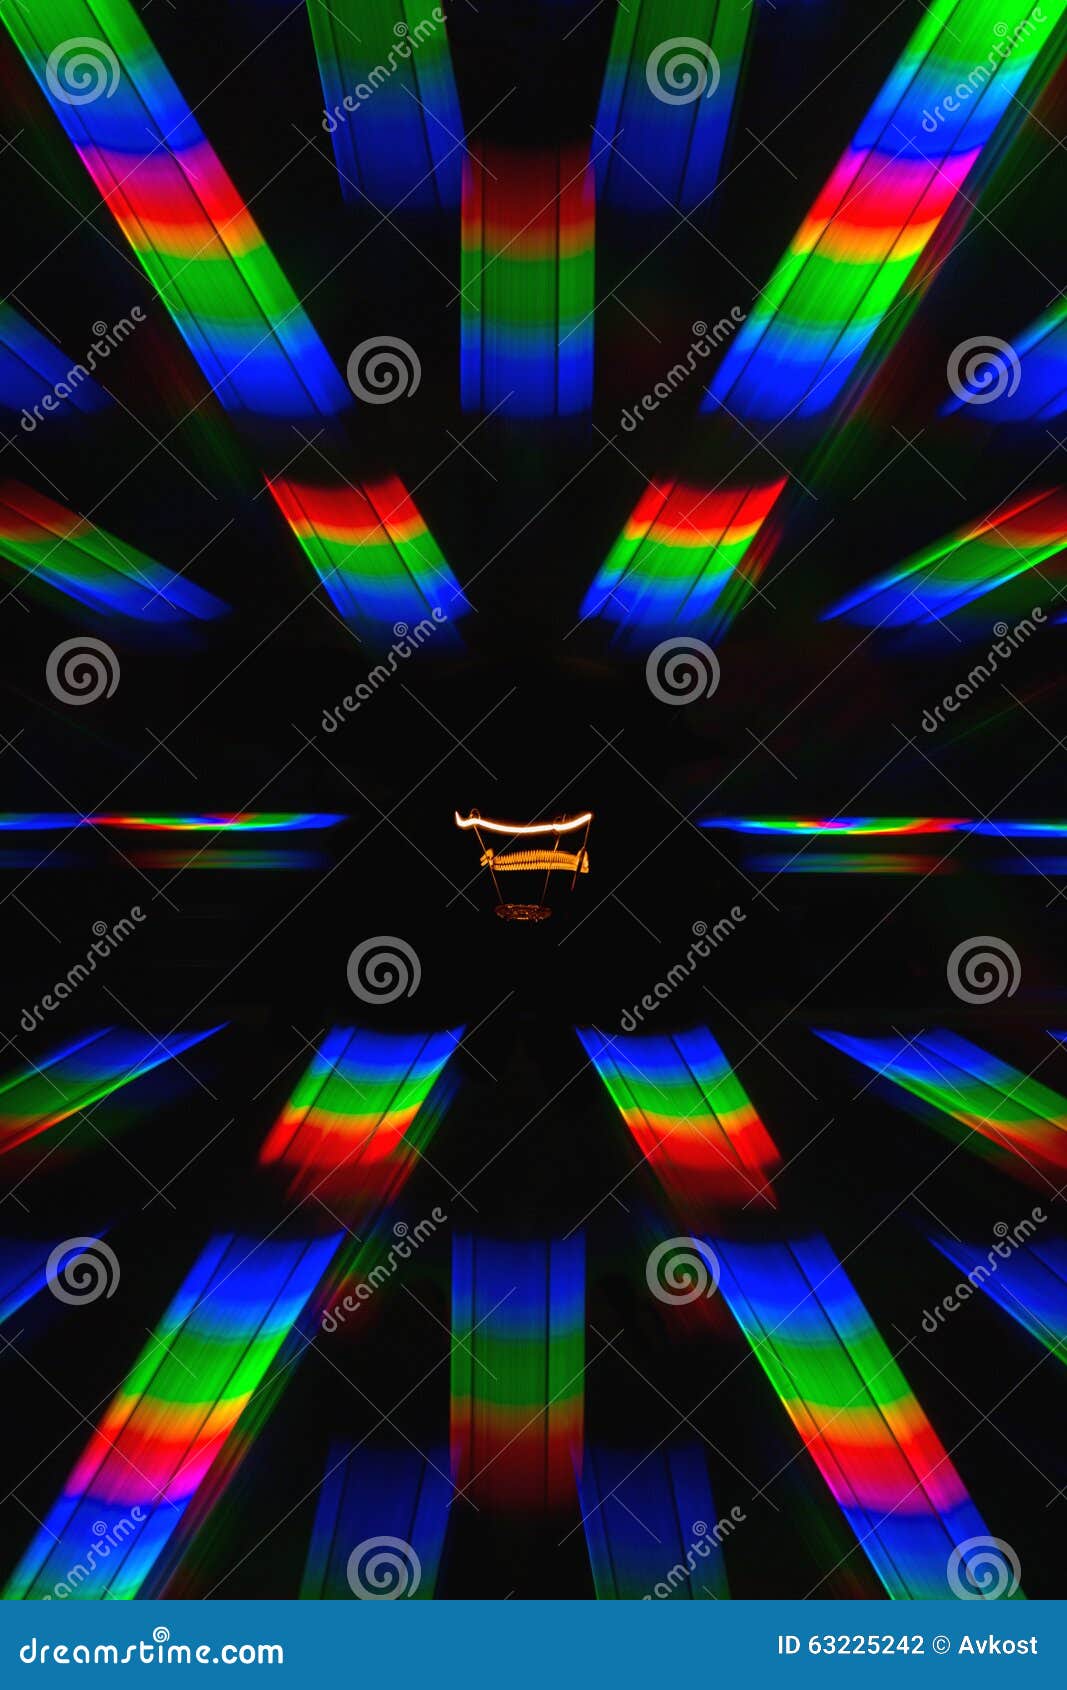 Diffraction Orders Photos   Free & Royalty Free Stock Photos from ...